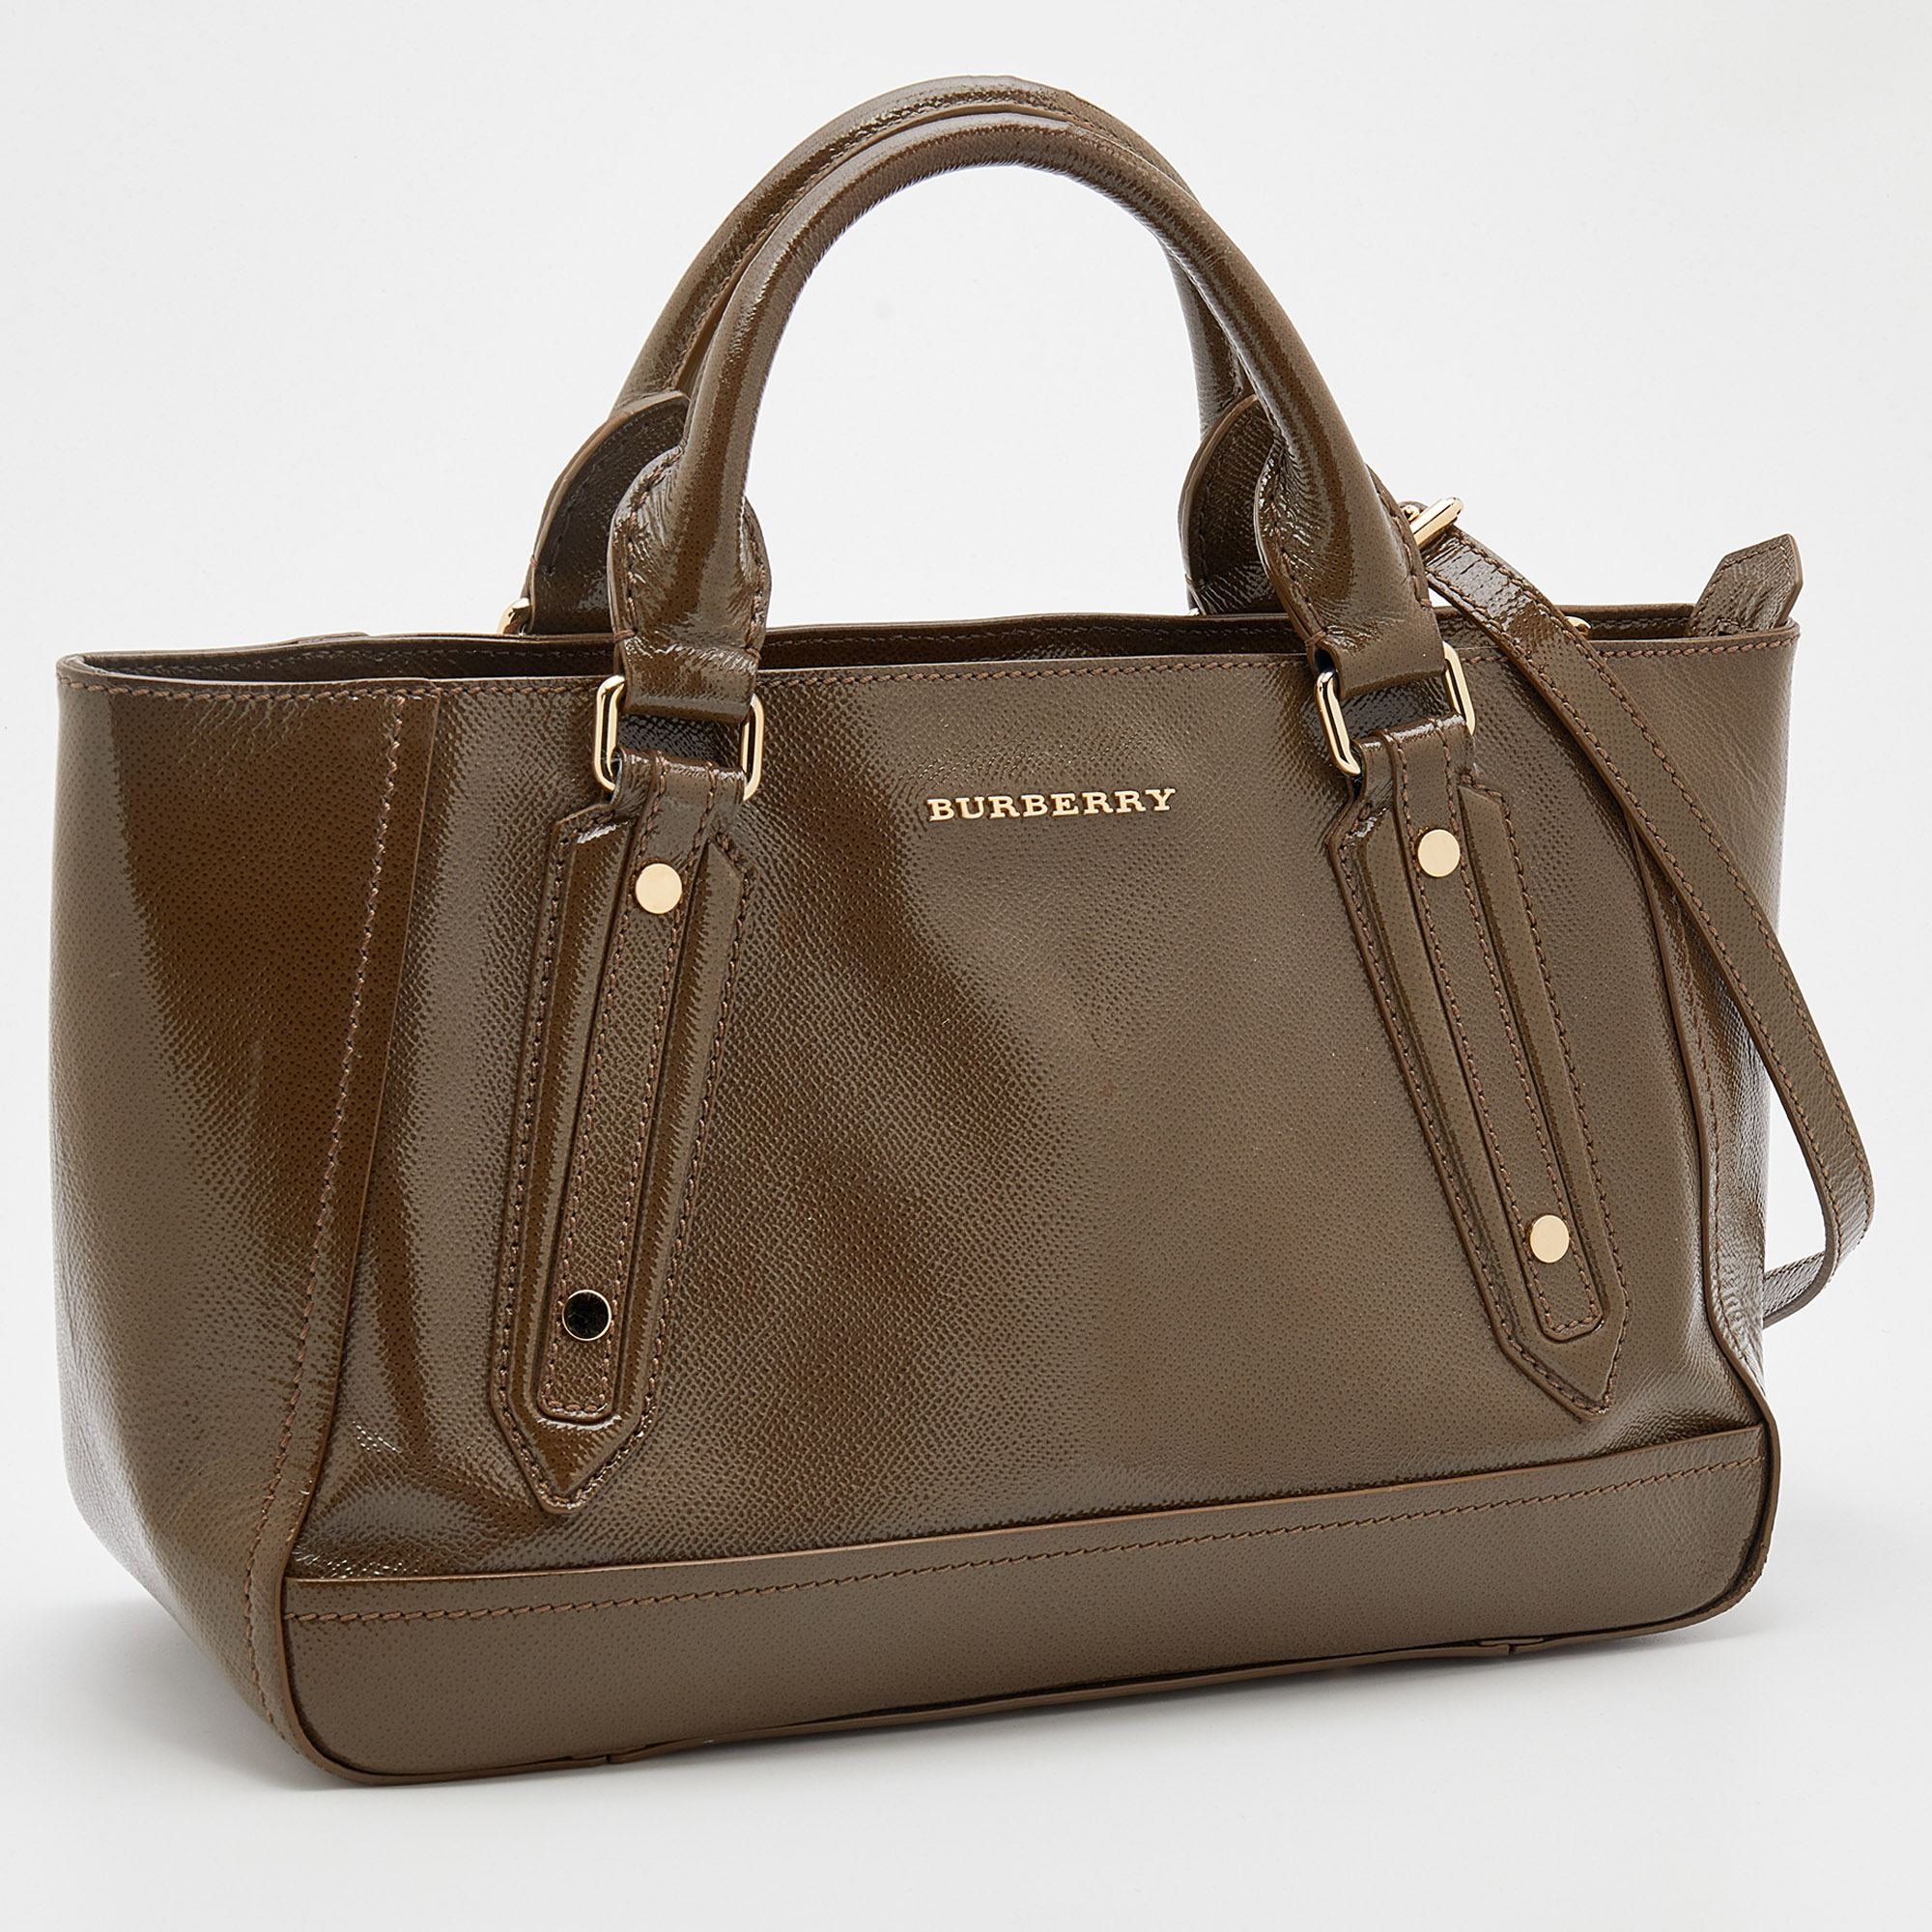 Burberry Brown Patent Leather Somerford Convertible Tote